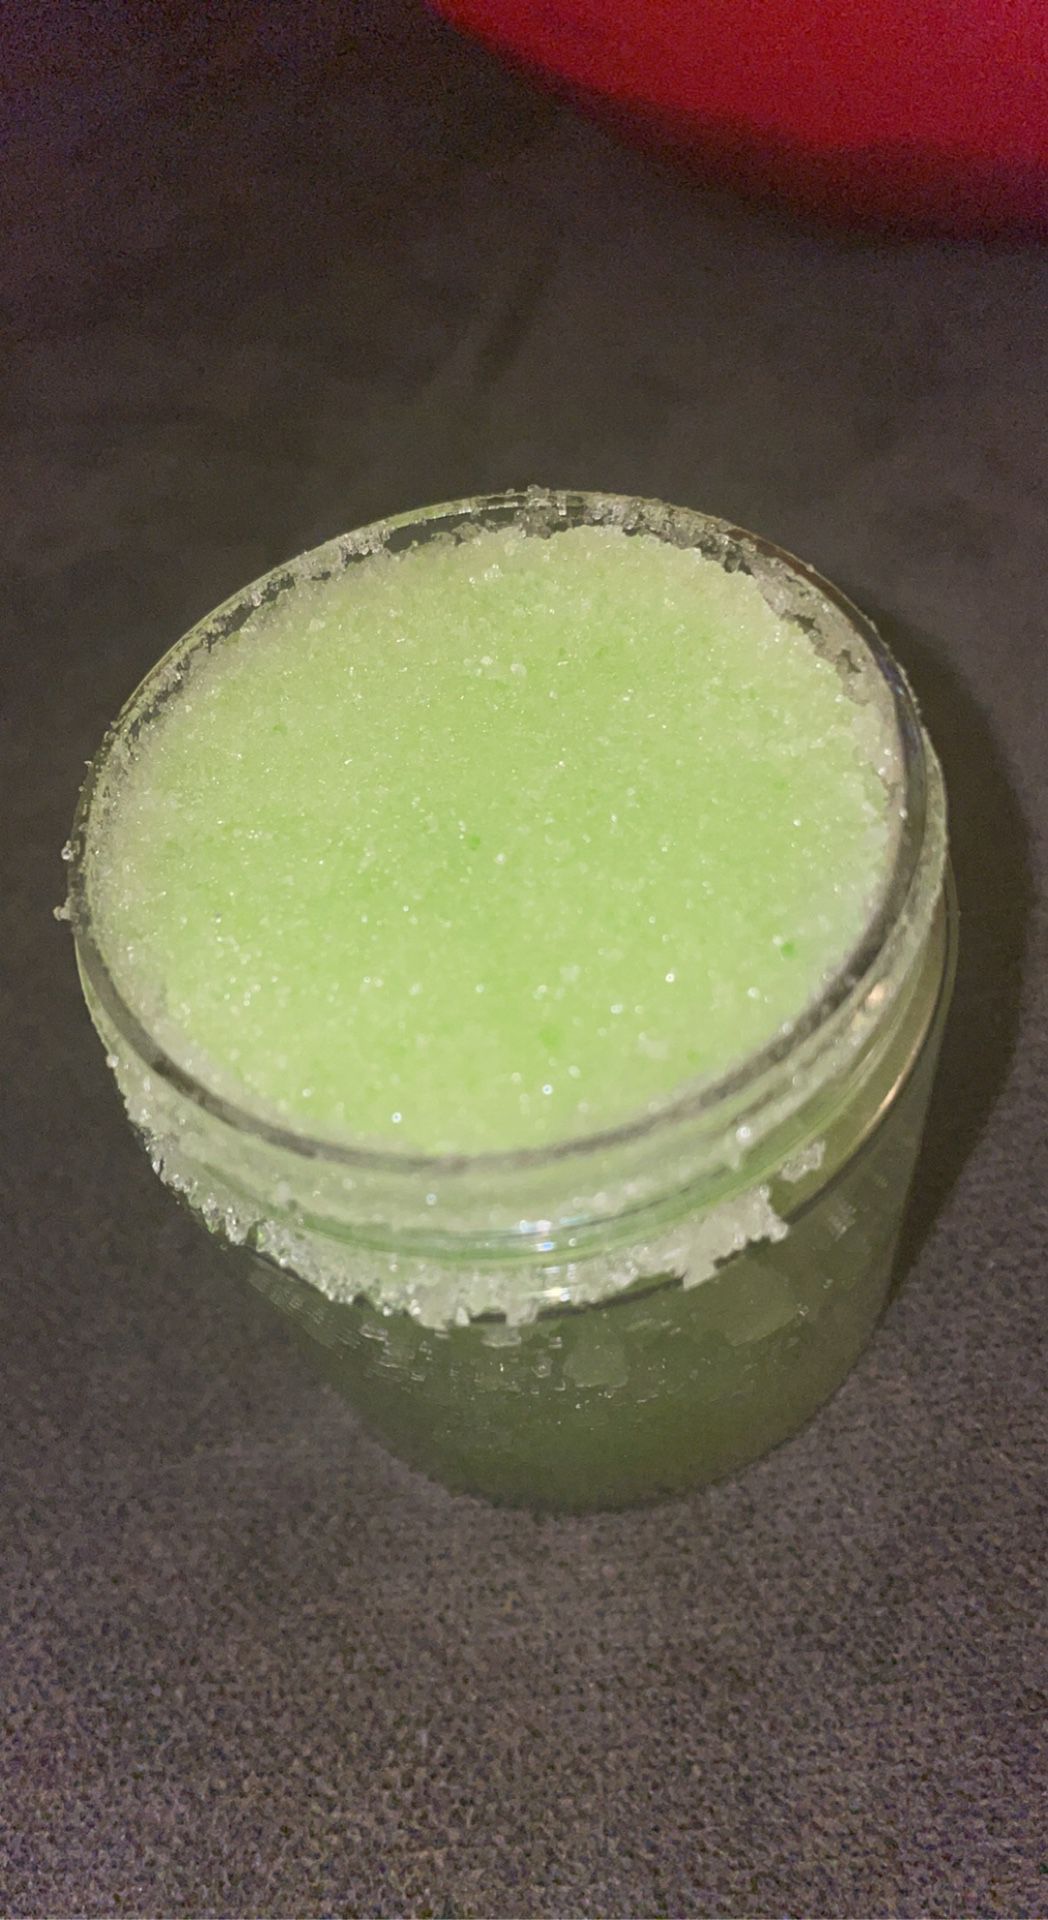 Homemade Exfoliants, Moisturizers, Bath Salts,  And Lip Scrubs! Shipping Or Pick Up!